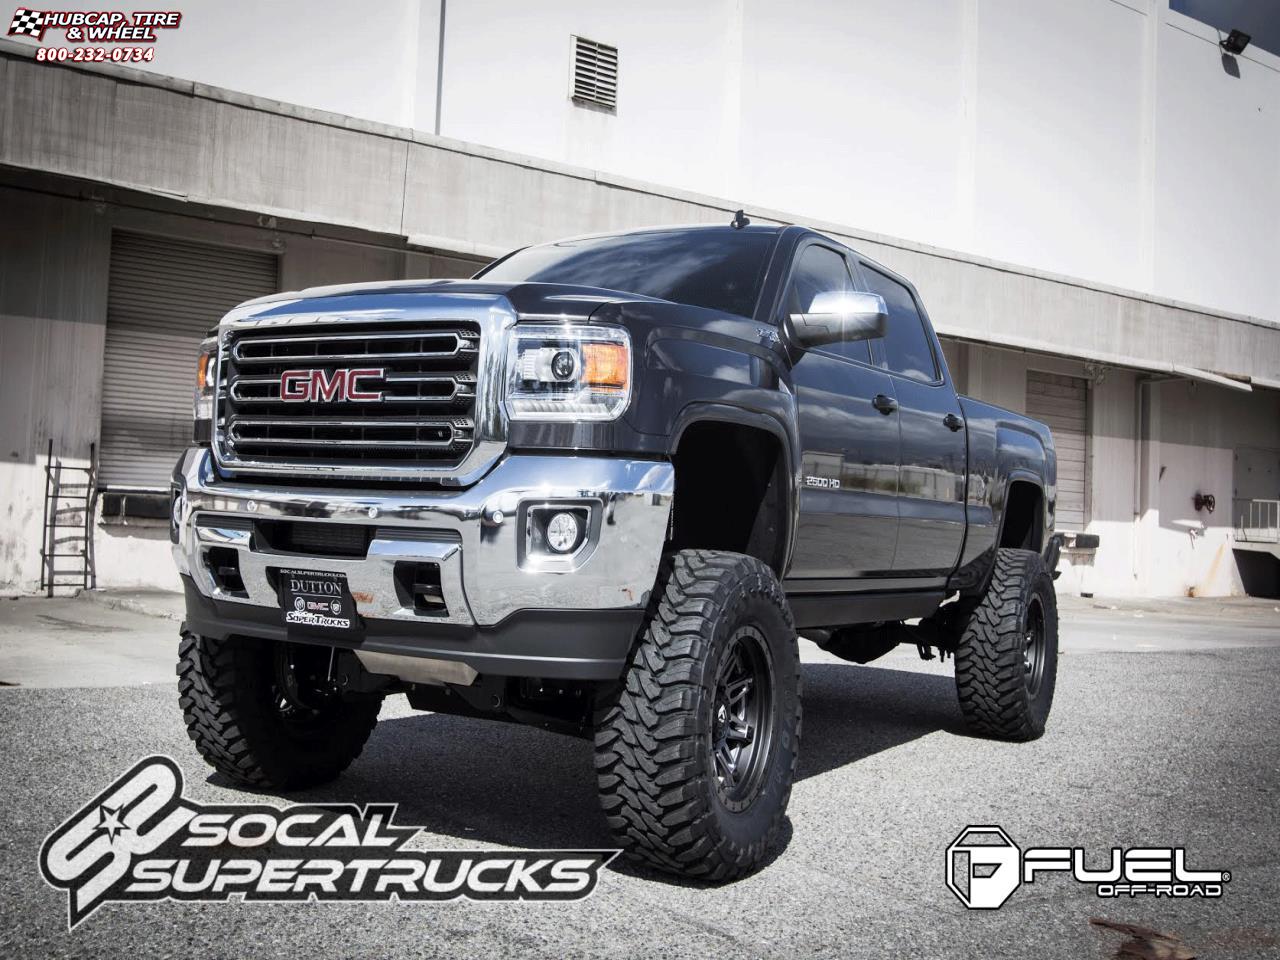 vehicle gallery/gmc sierra 2500 fuel hostage ii d232 0X0  Anthracite Center, Matt Black & Anthracite Outer wheels and rims